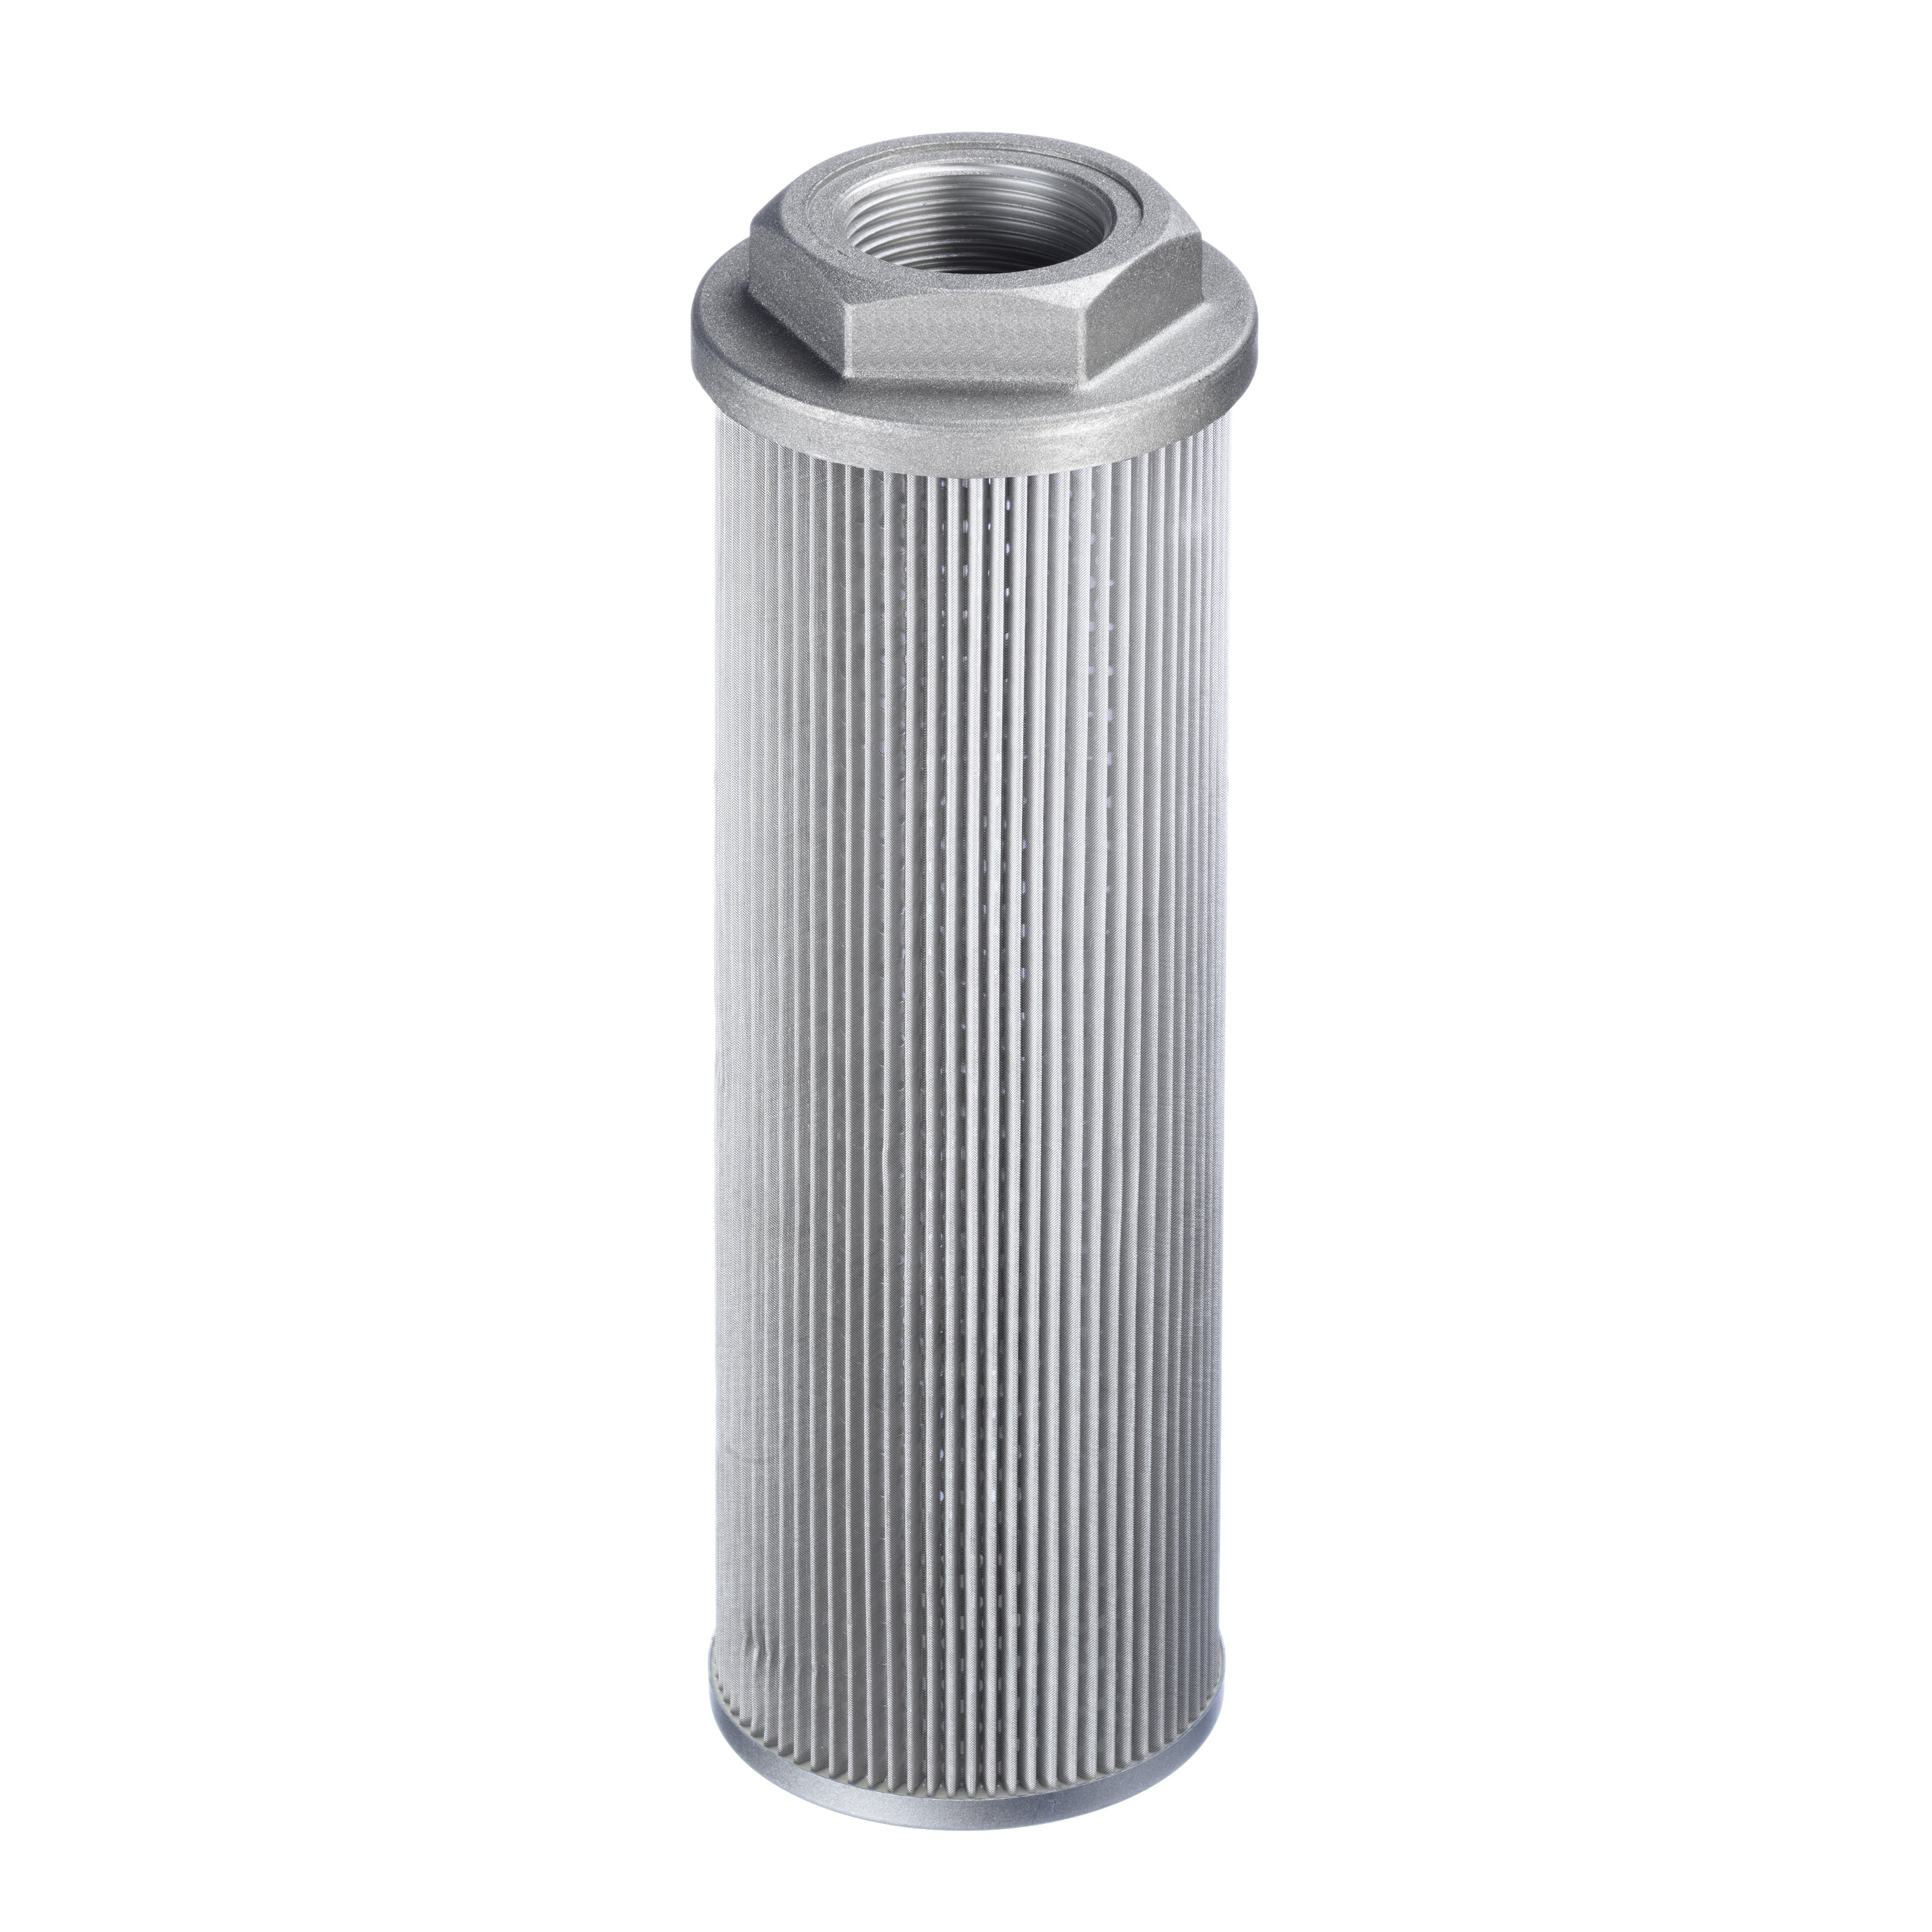 SUS-150-N48-272-125-A-B0.2 : Stauff Suction Strainer, Aluminum End Cap, 3" NPT, 104GPM, 125 Micron, 3psi Bypass